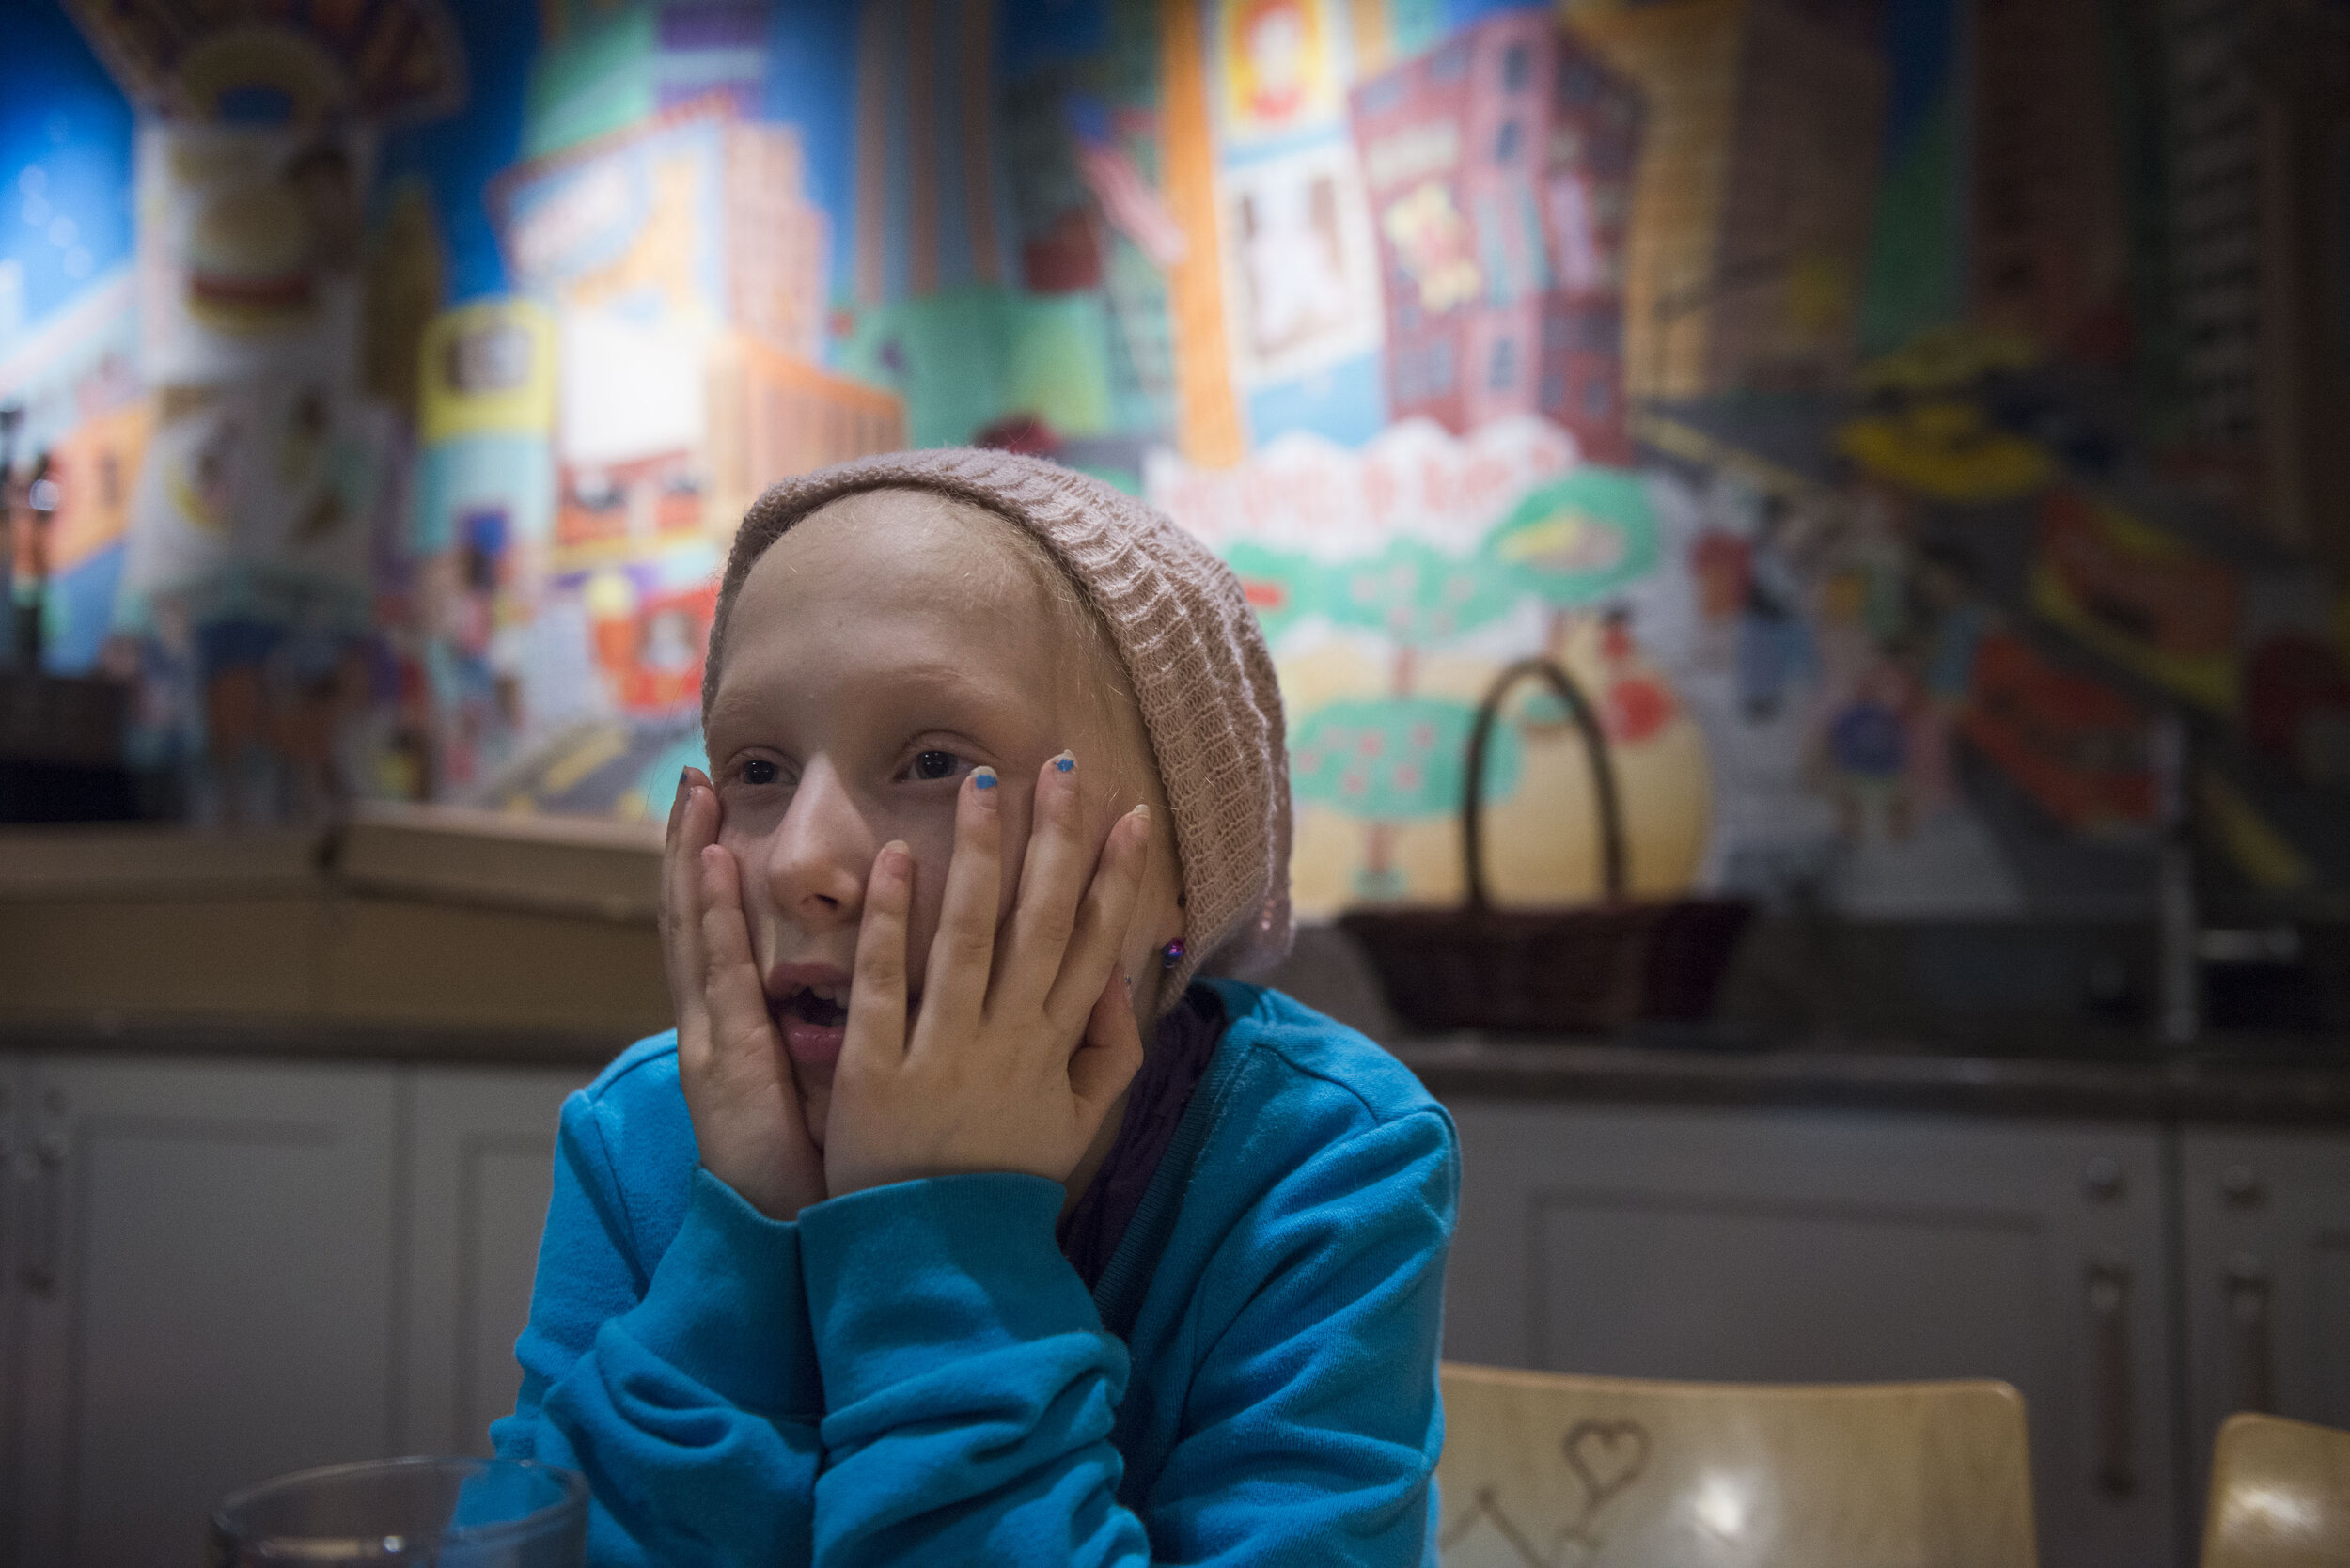  Peyton waits for dinner in the kitchen and dining area of the Ronald McDonald House.  